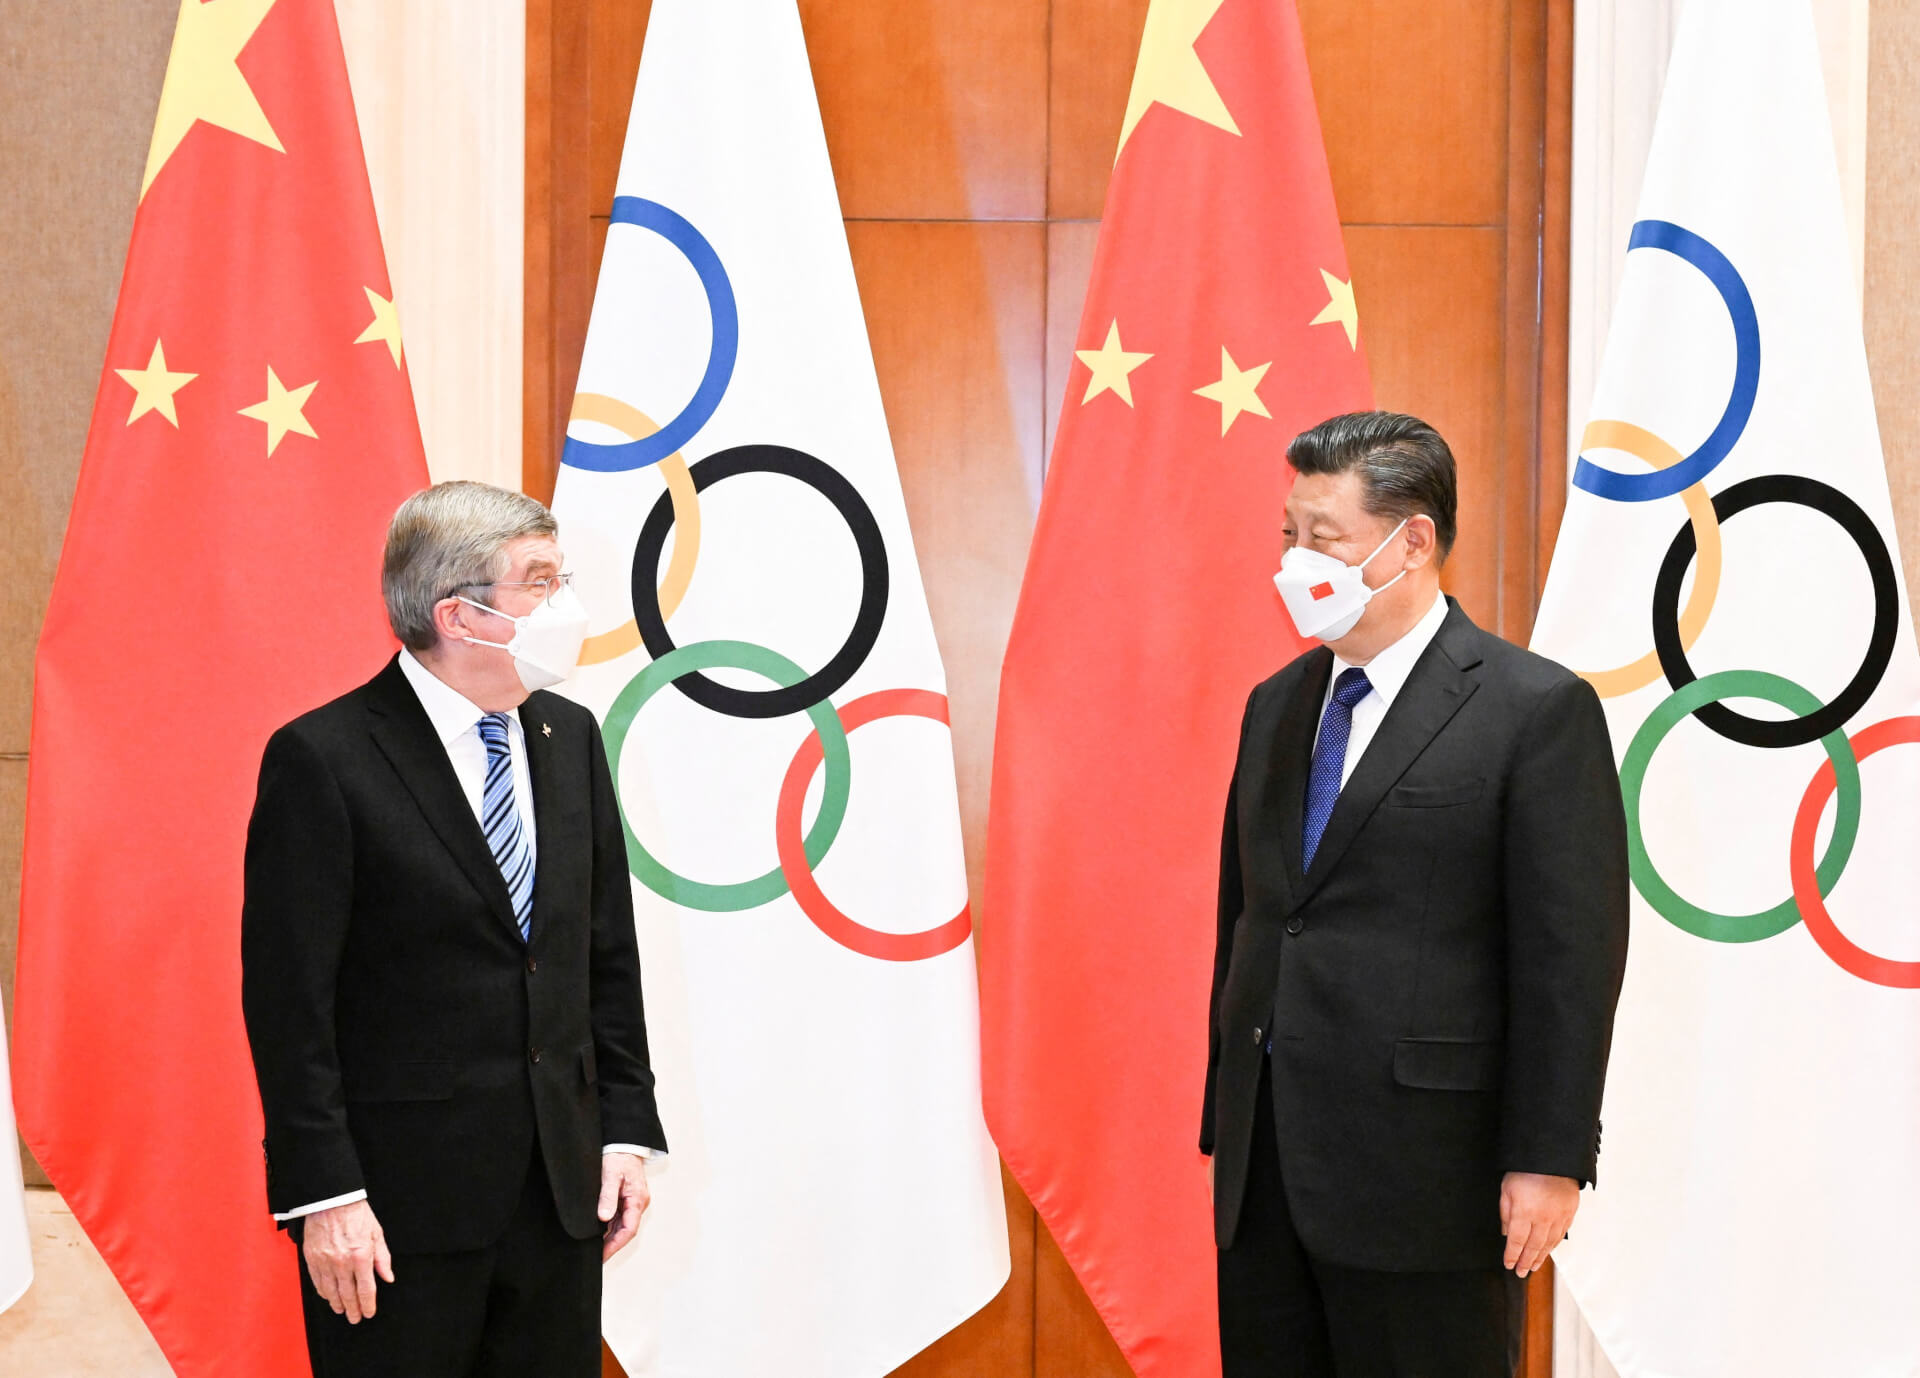 Chinese Diplomacy Round-Up: Xi Jinping’s Winter Olympics Meetings (5-6 February, 2022)